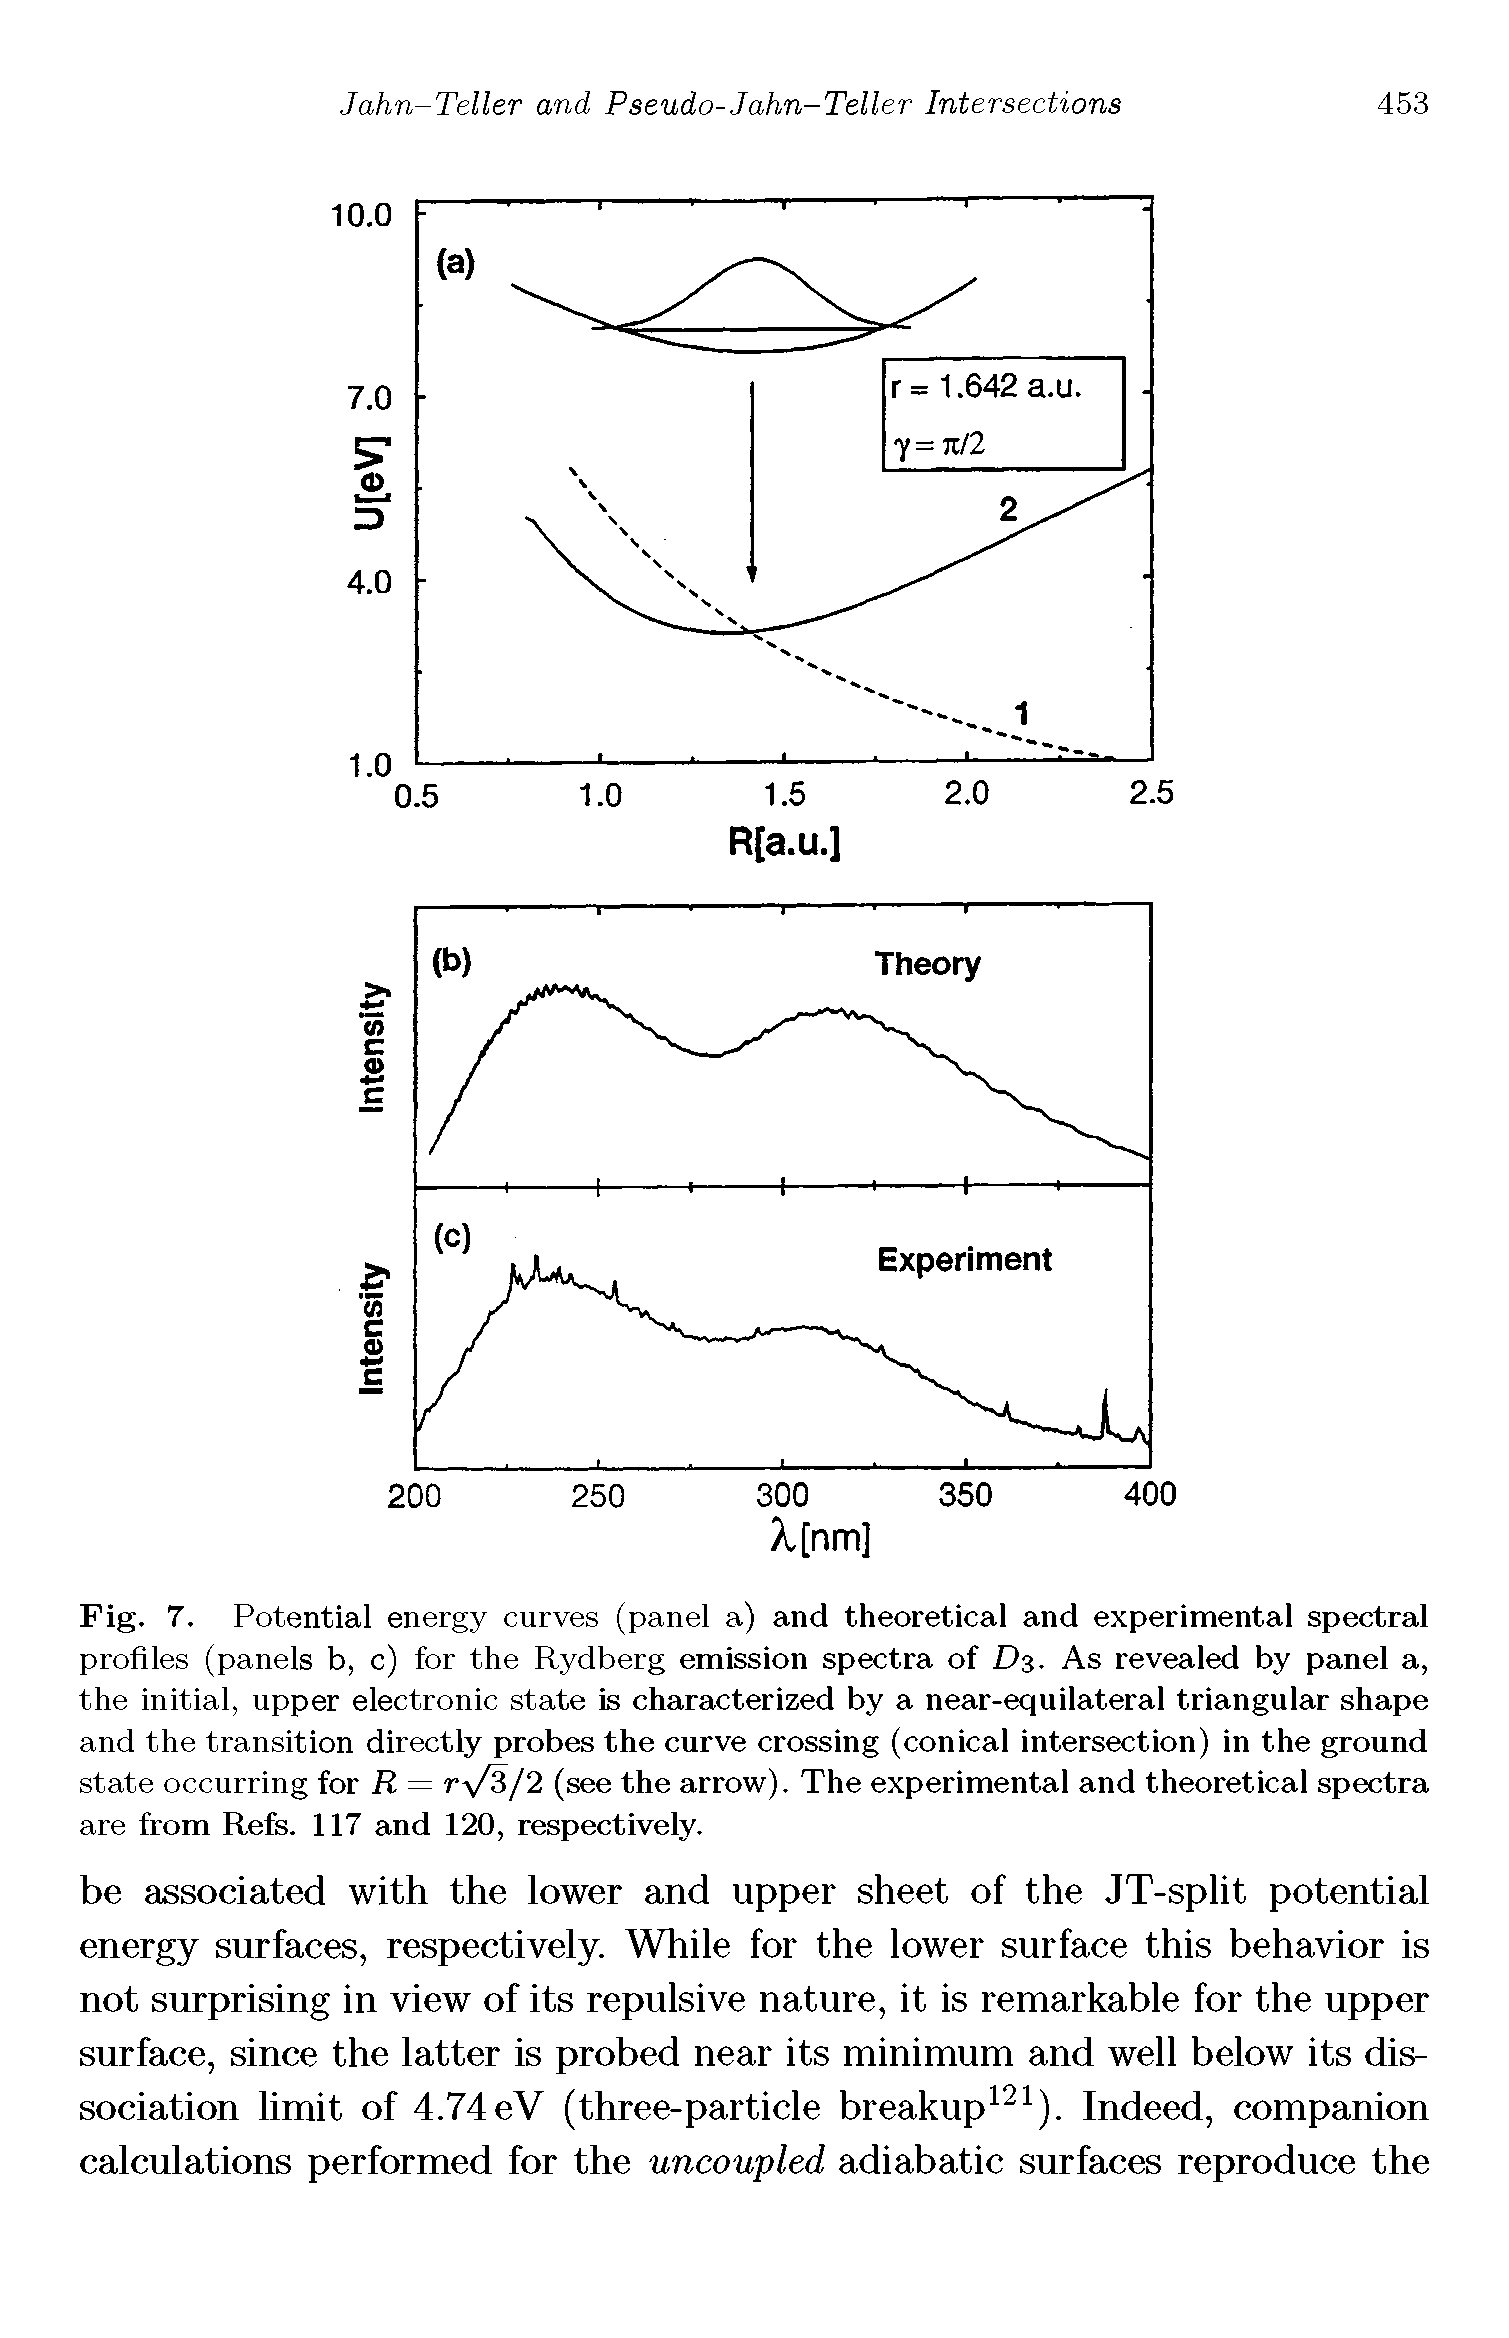 Fig. 7. Potential energy curves (panel a) and theoretical and experimental spectral profiles (panels b, c) for the Rydberg emission spectra of Ds. As revealed by panel a, the initial, upper electronic state is characterized by a near-equilateral triangular shape and the transition directly probes the curve crossing (conical intersection) in the ground state occurring for R = ry/3l2 (see the arrow). The experimental and theoretical spectra are from Refs. 117 and 120, respectively.